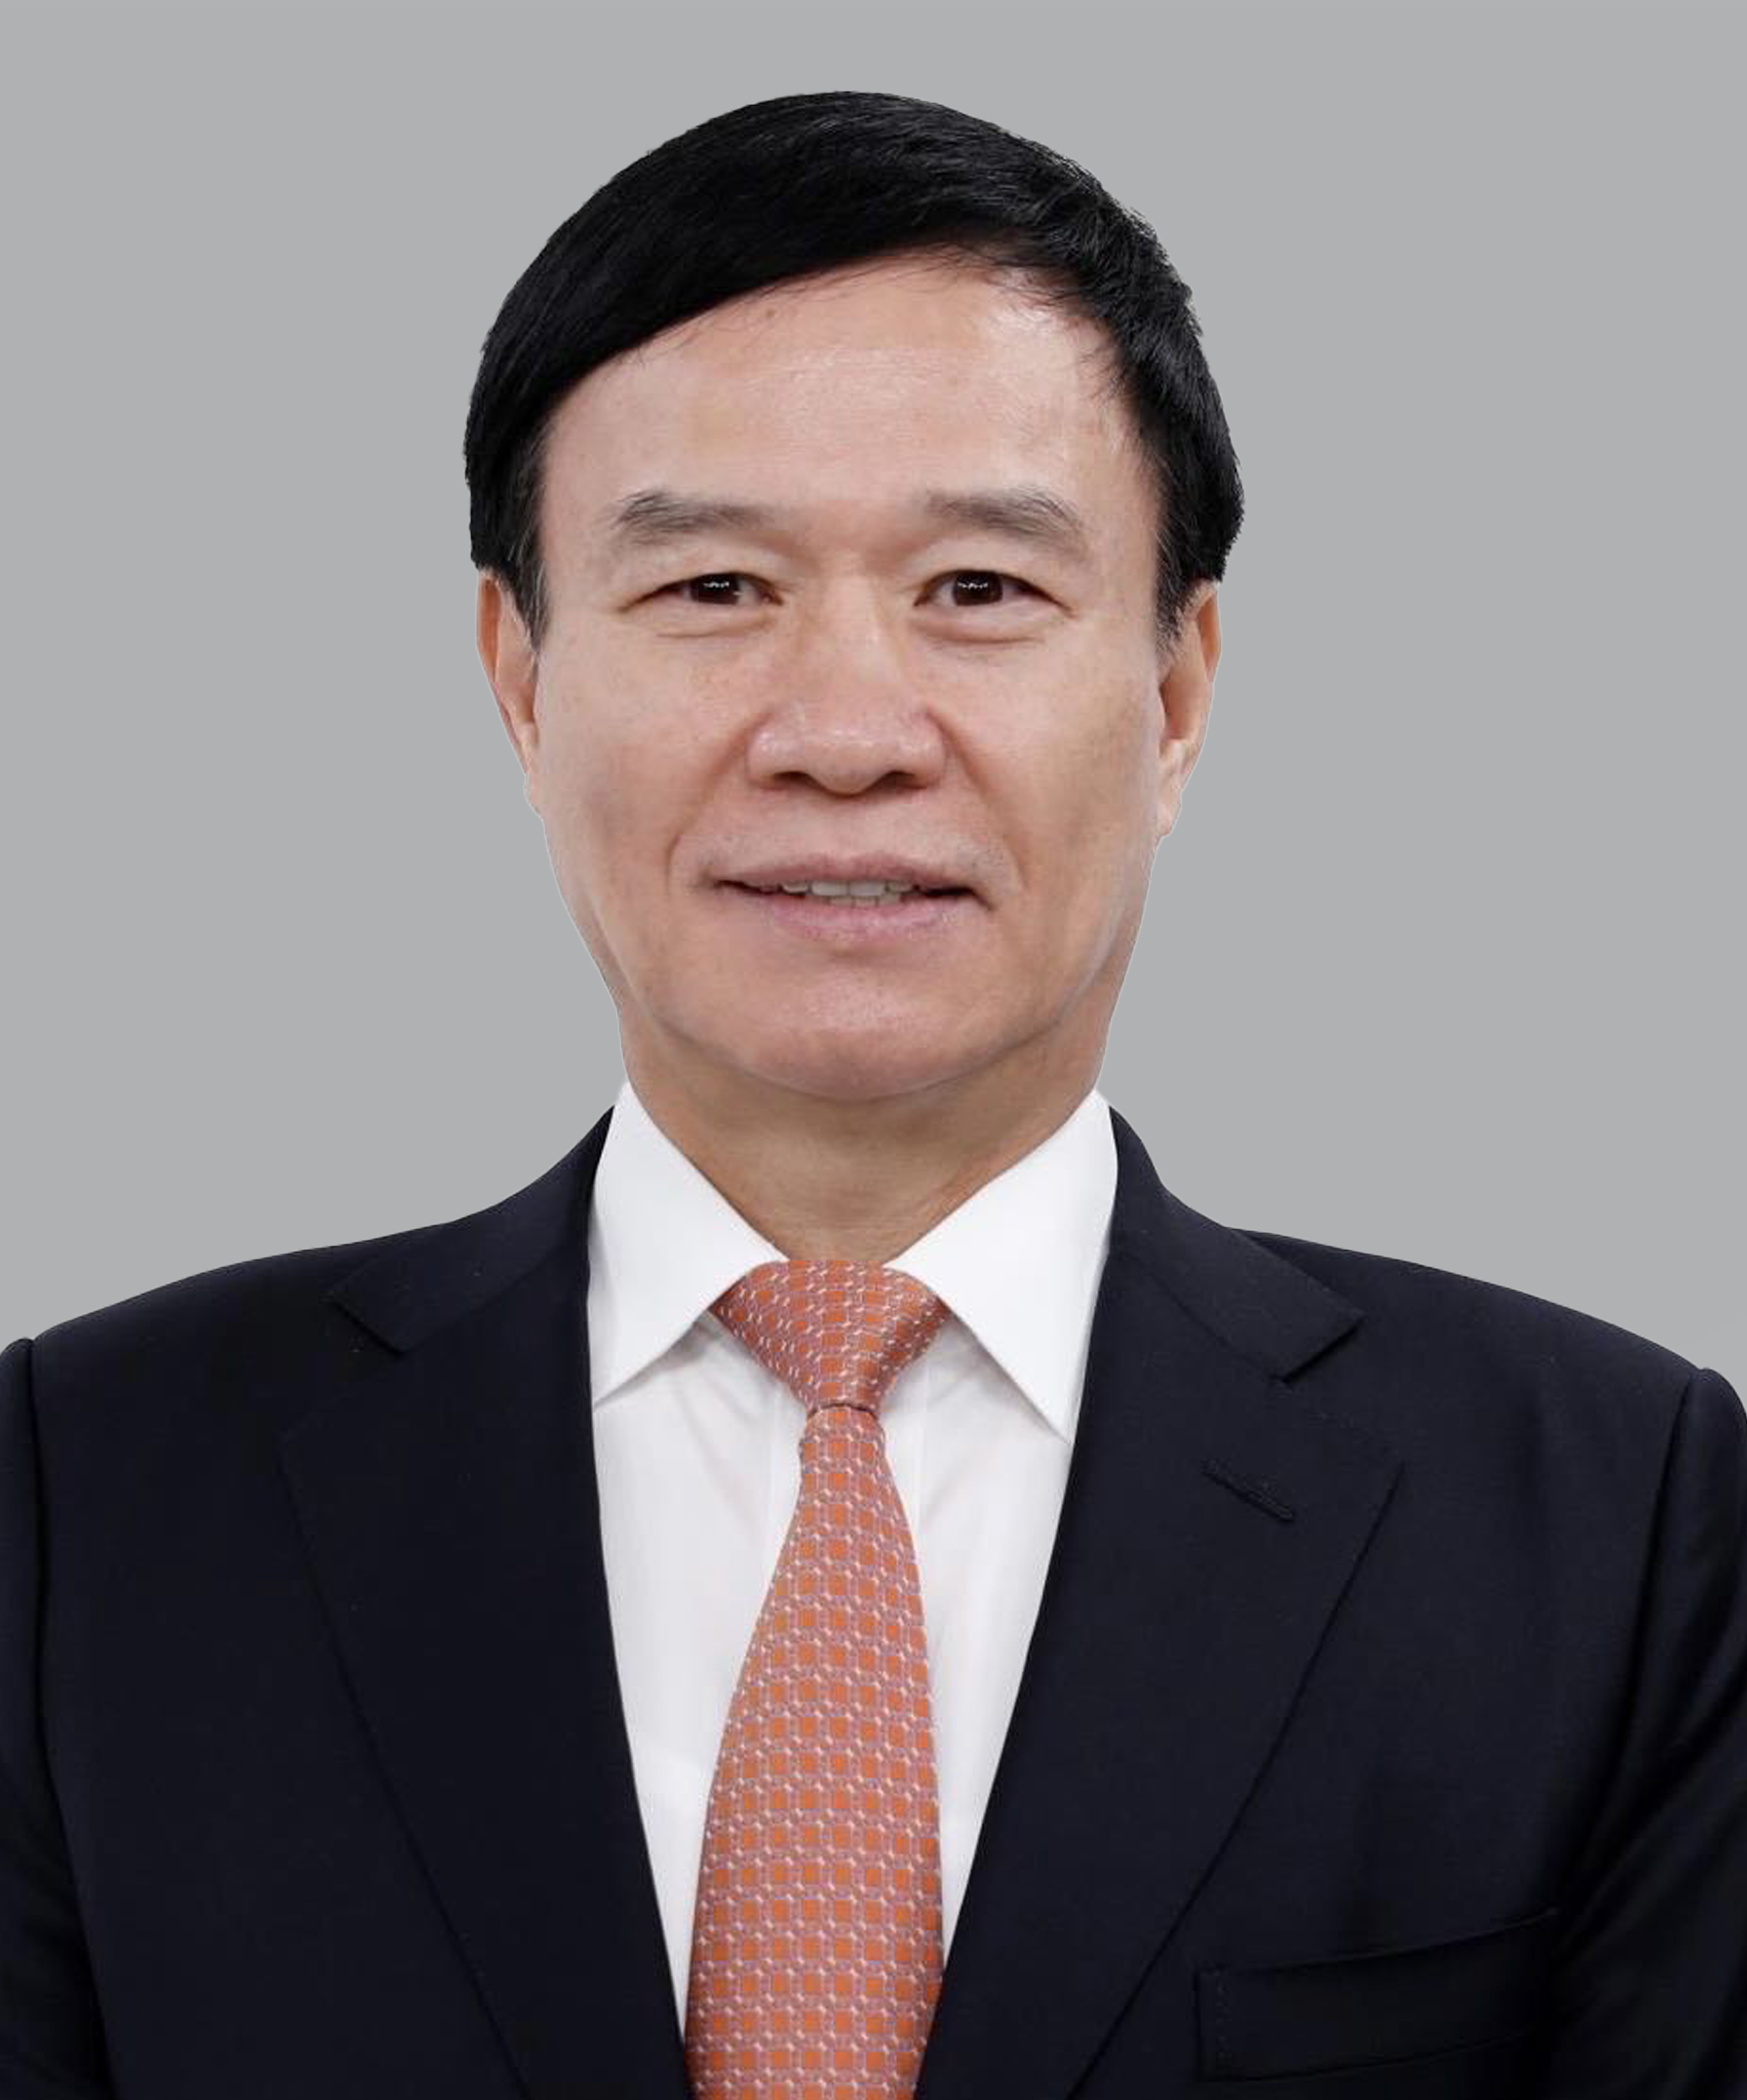 Mr. Luo Jianrong